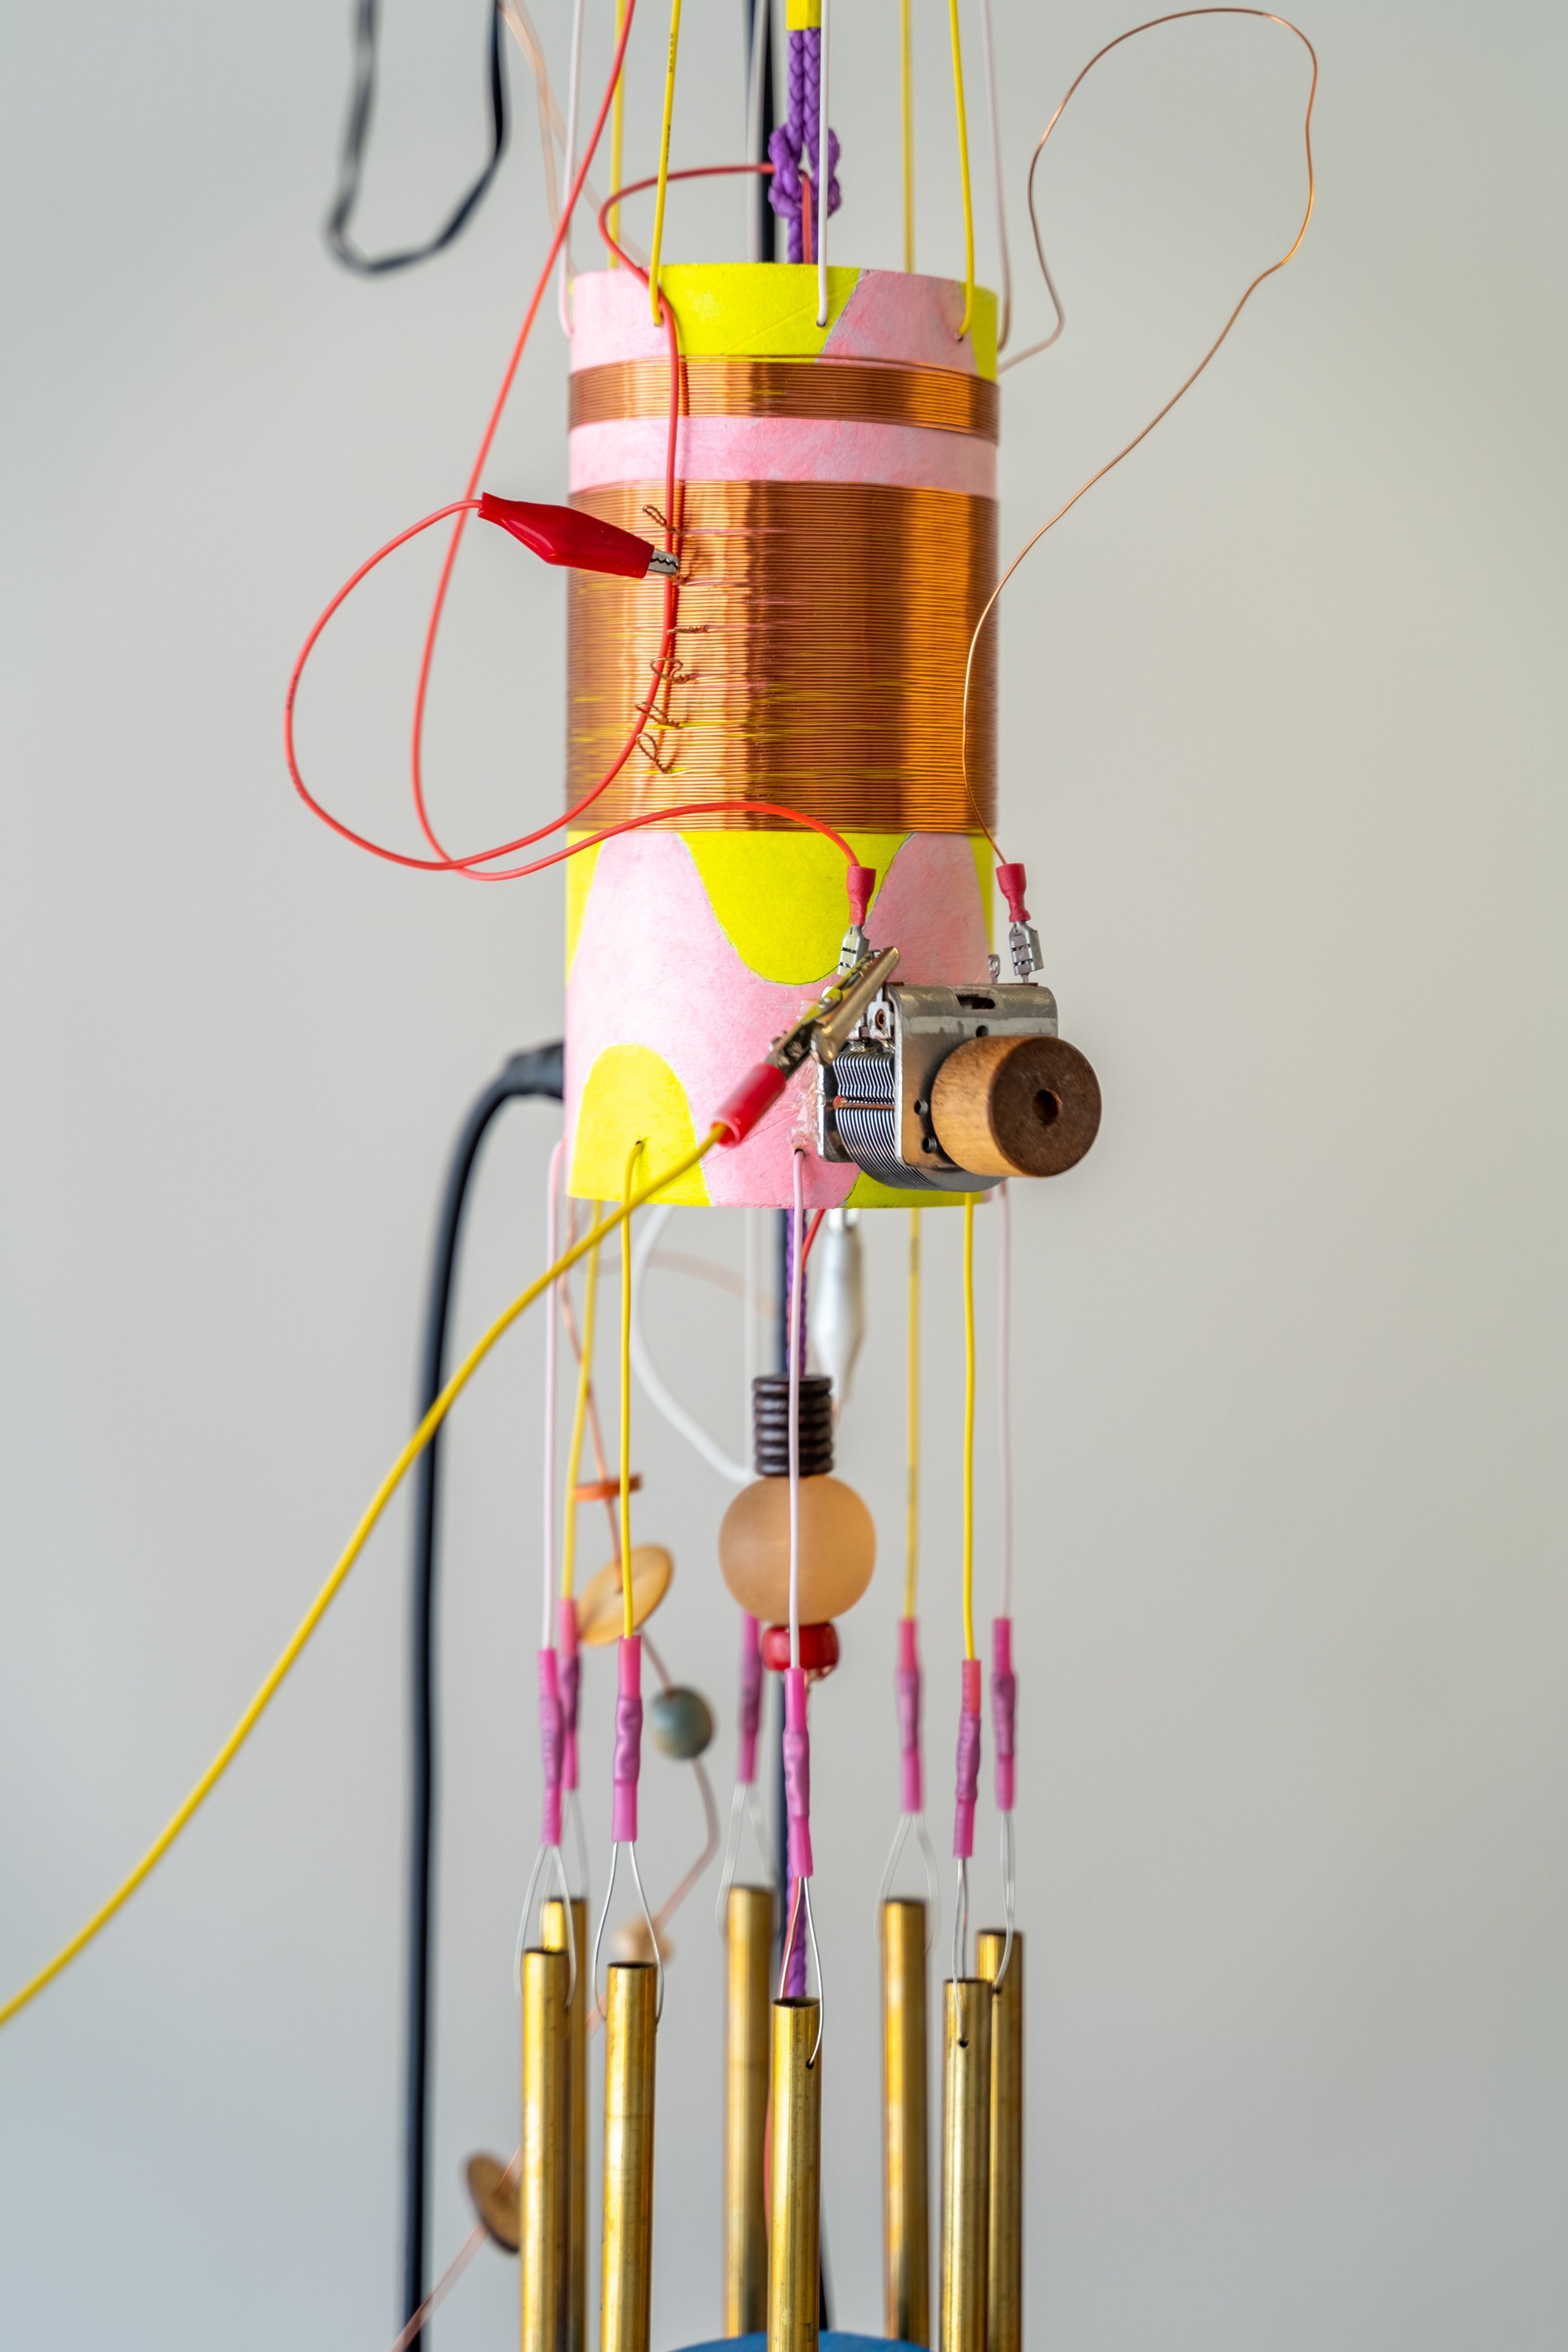  Peter Simensky  Pyrite Radio - Chimes (Yellow/Pink) , 2021 (detail) Pyrite (fool's gold), copper, electrical wires, bead work, feathers, cardboard tube, paint, amplifiers, and radio hardware 